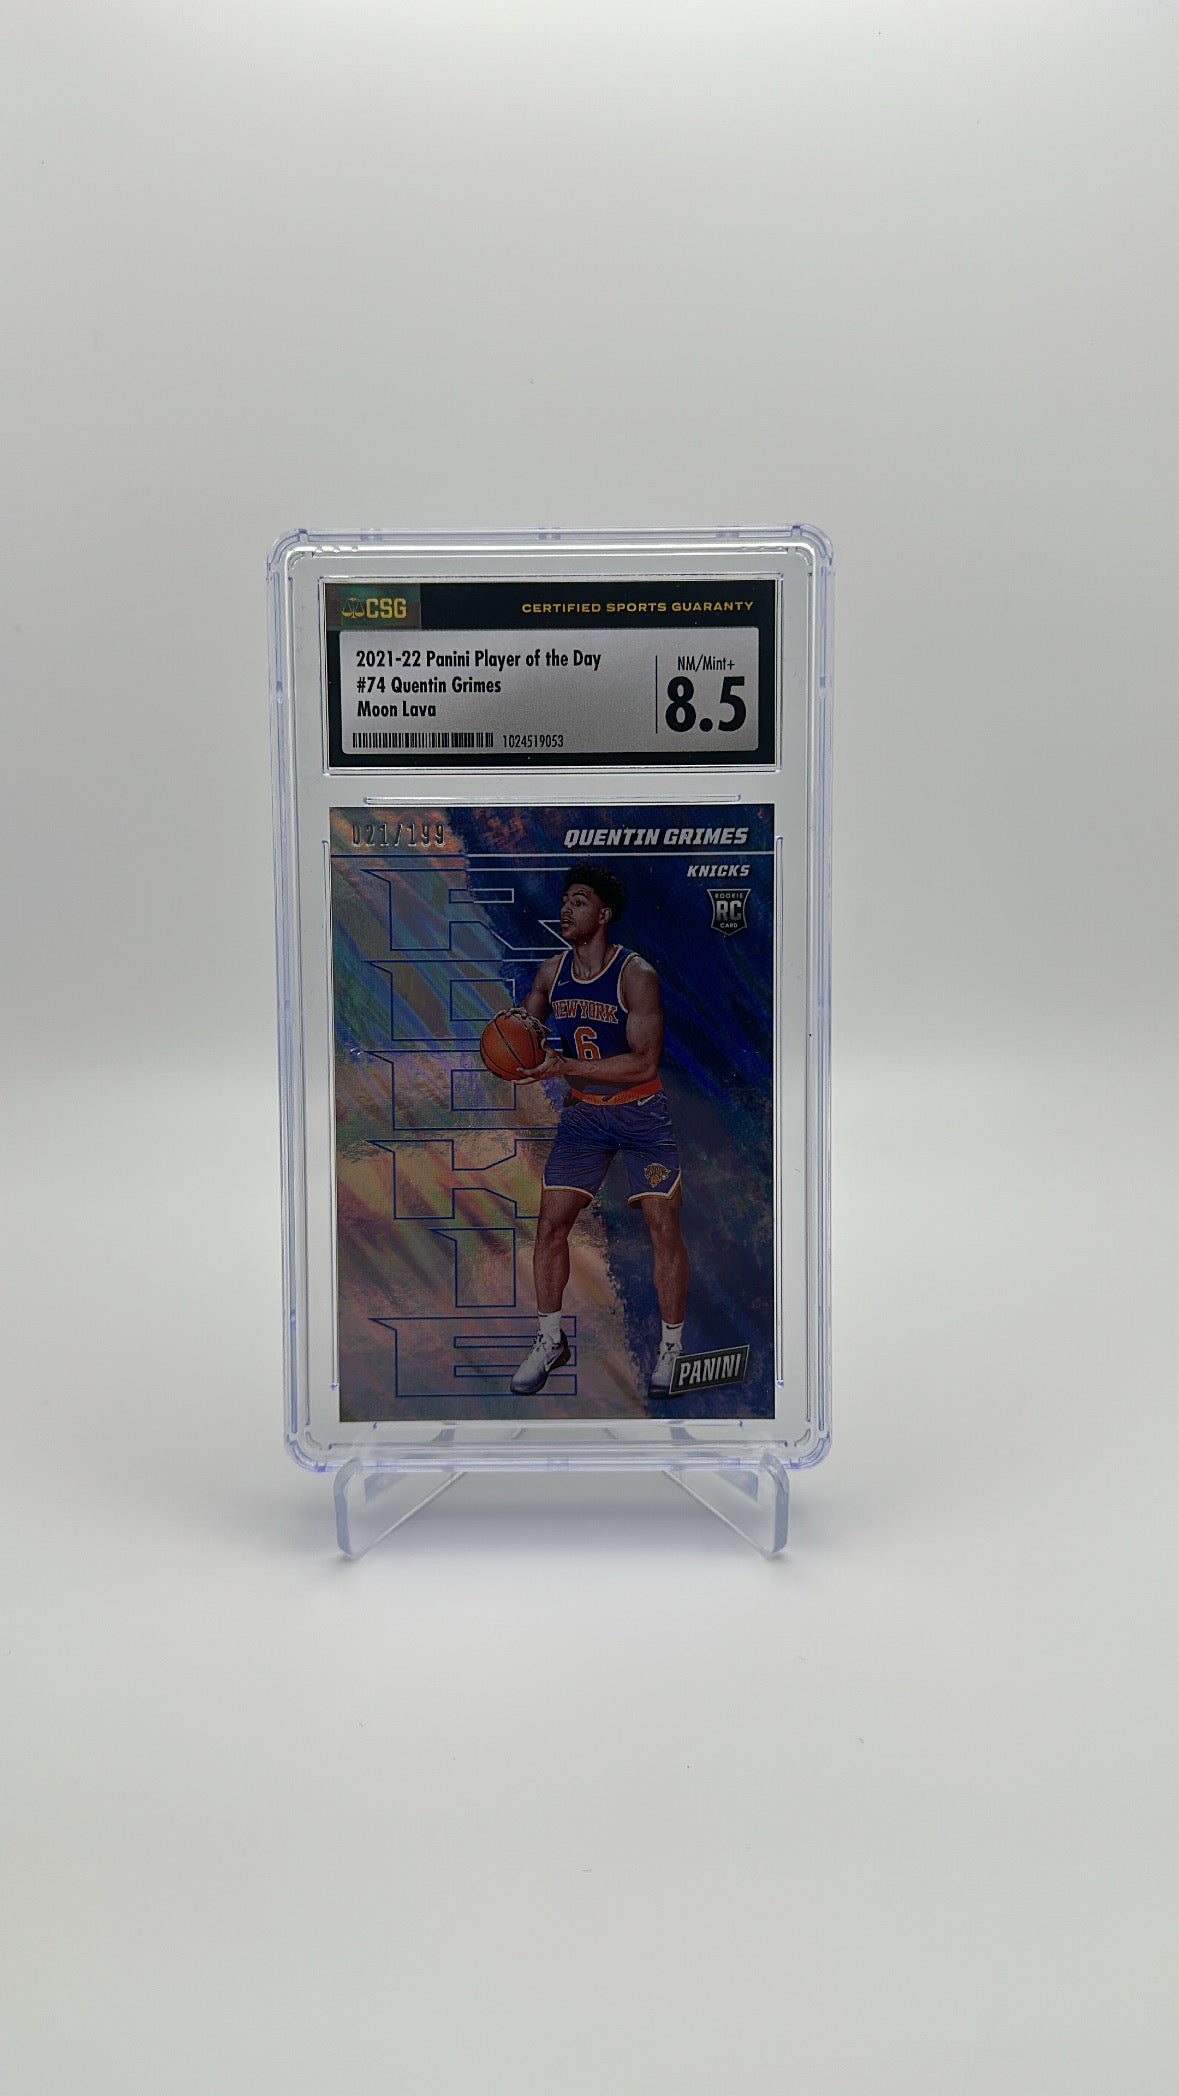 2021-22 Panini Player of the Day - Quentin Grimes 74 - Moon Lava /199 - CSG CGC 8.5